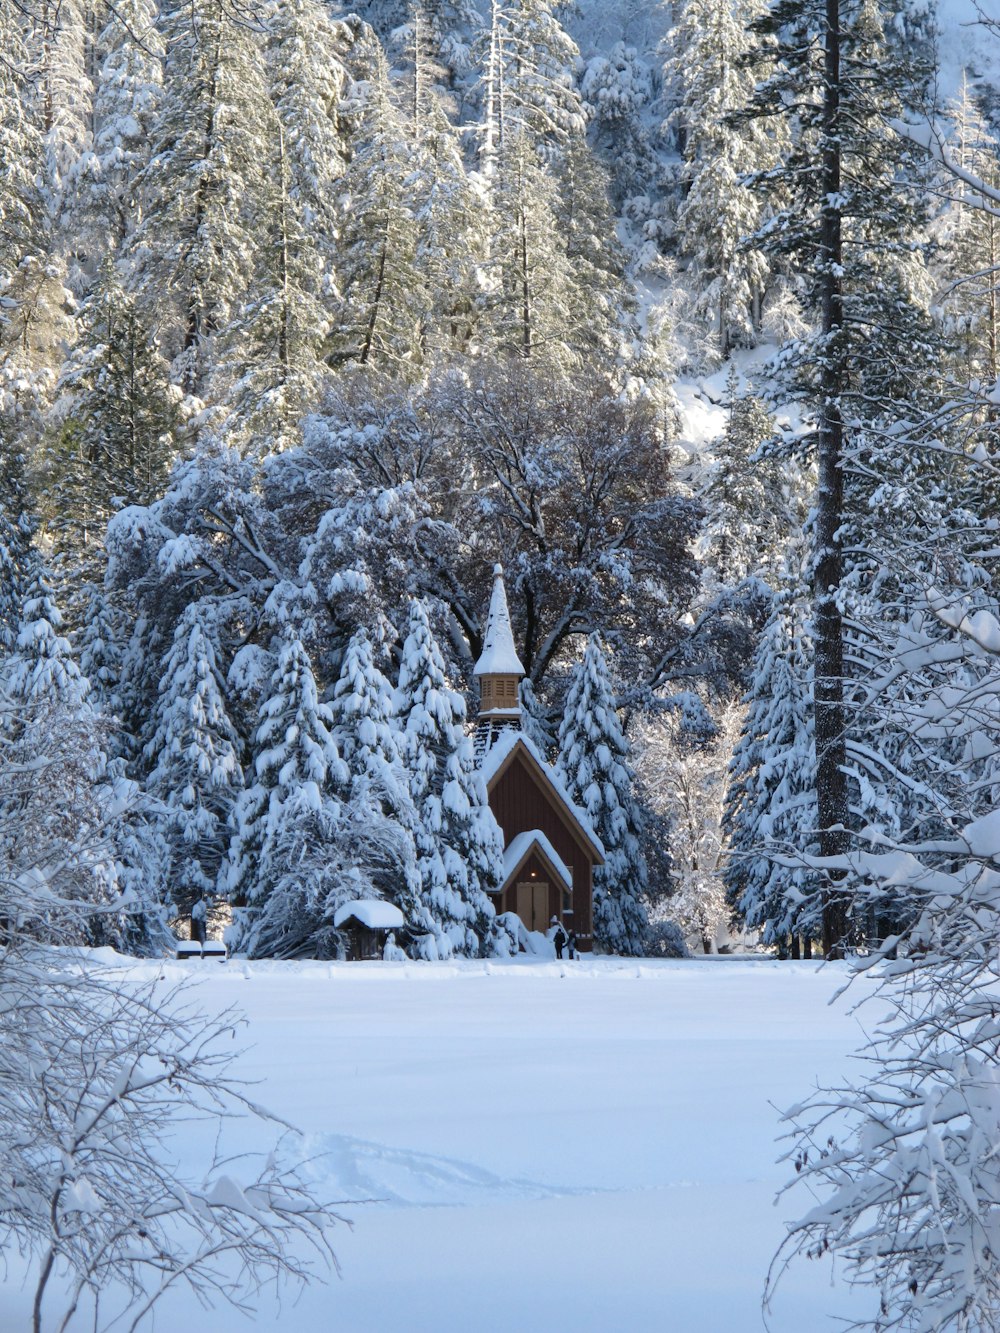 house on snow surround with pine trees